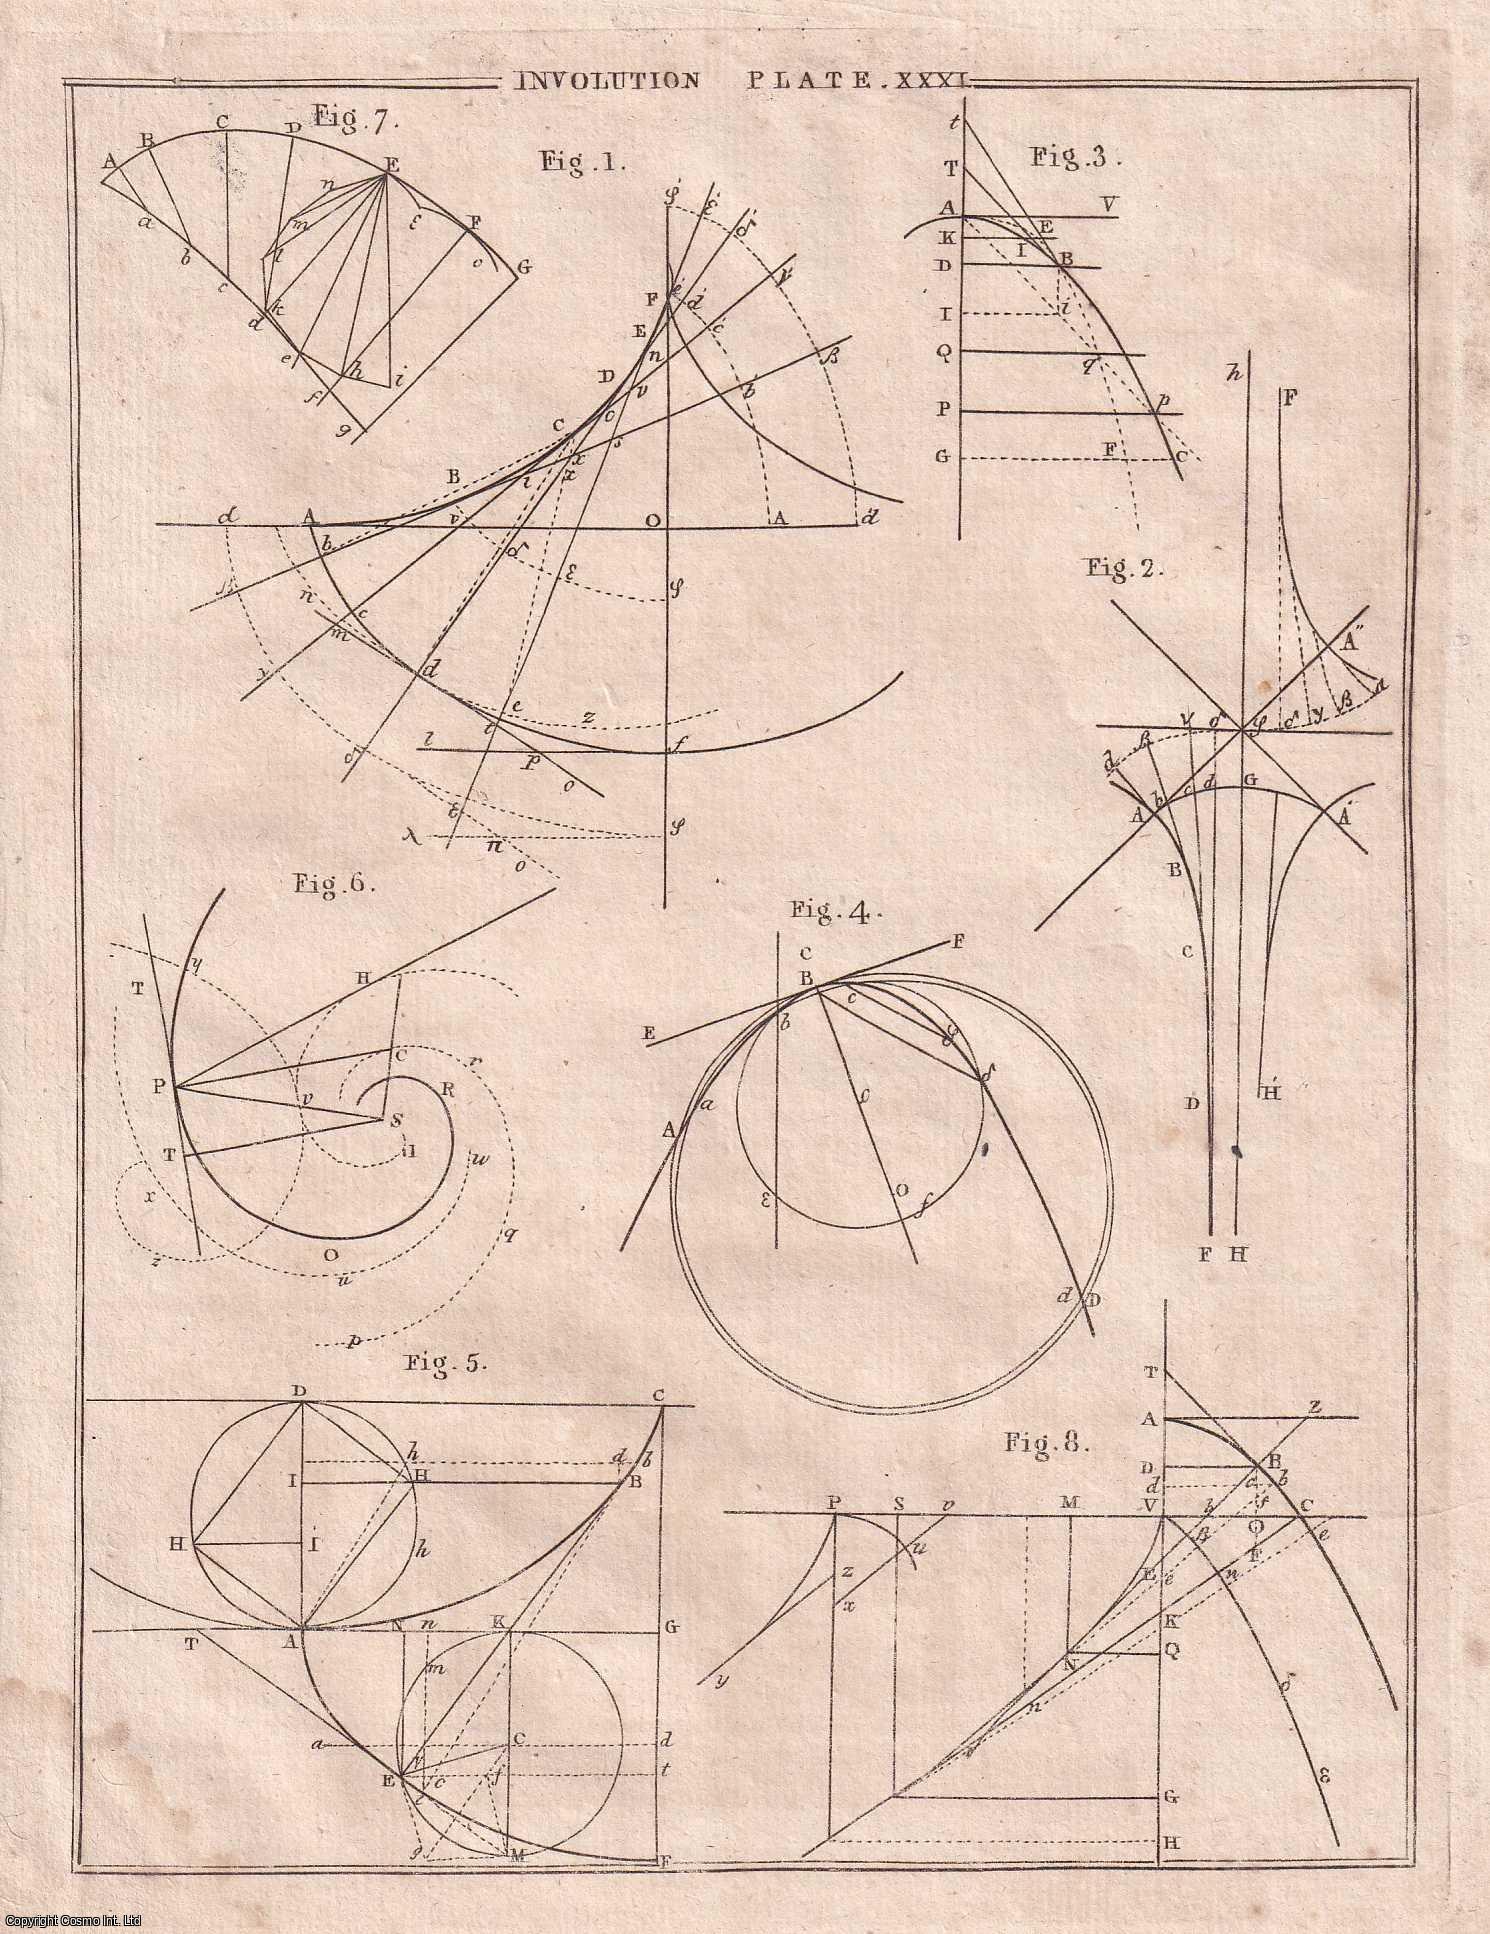 John Robison FRSE (1739-1805), British physicist & mathematician. Professor of natural philosophy. - Geometry; Involution and Evolution, terms introduced into geometry by Christiaan Huygens. A rare original article from the Encyclopaedia Britannica, 1797.